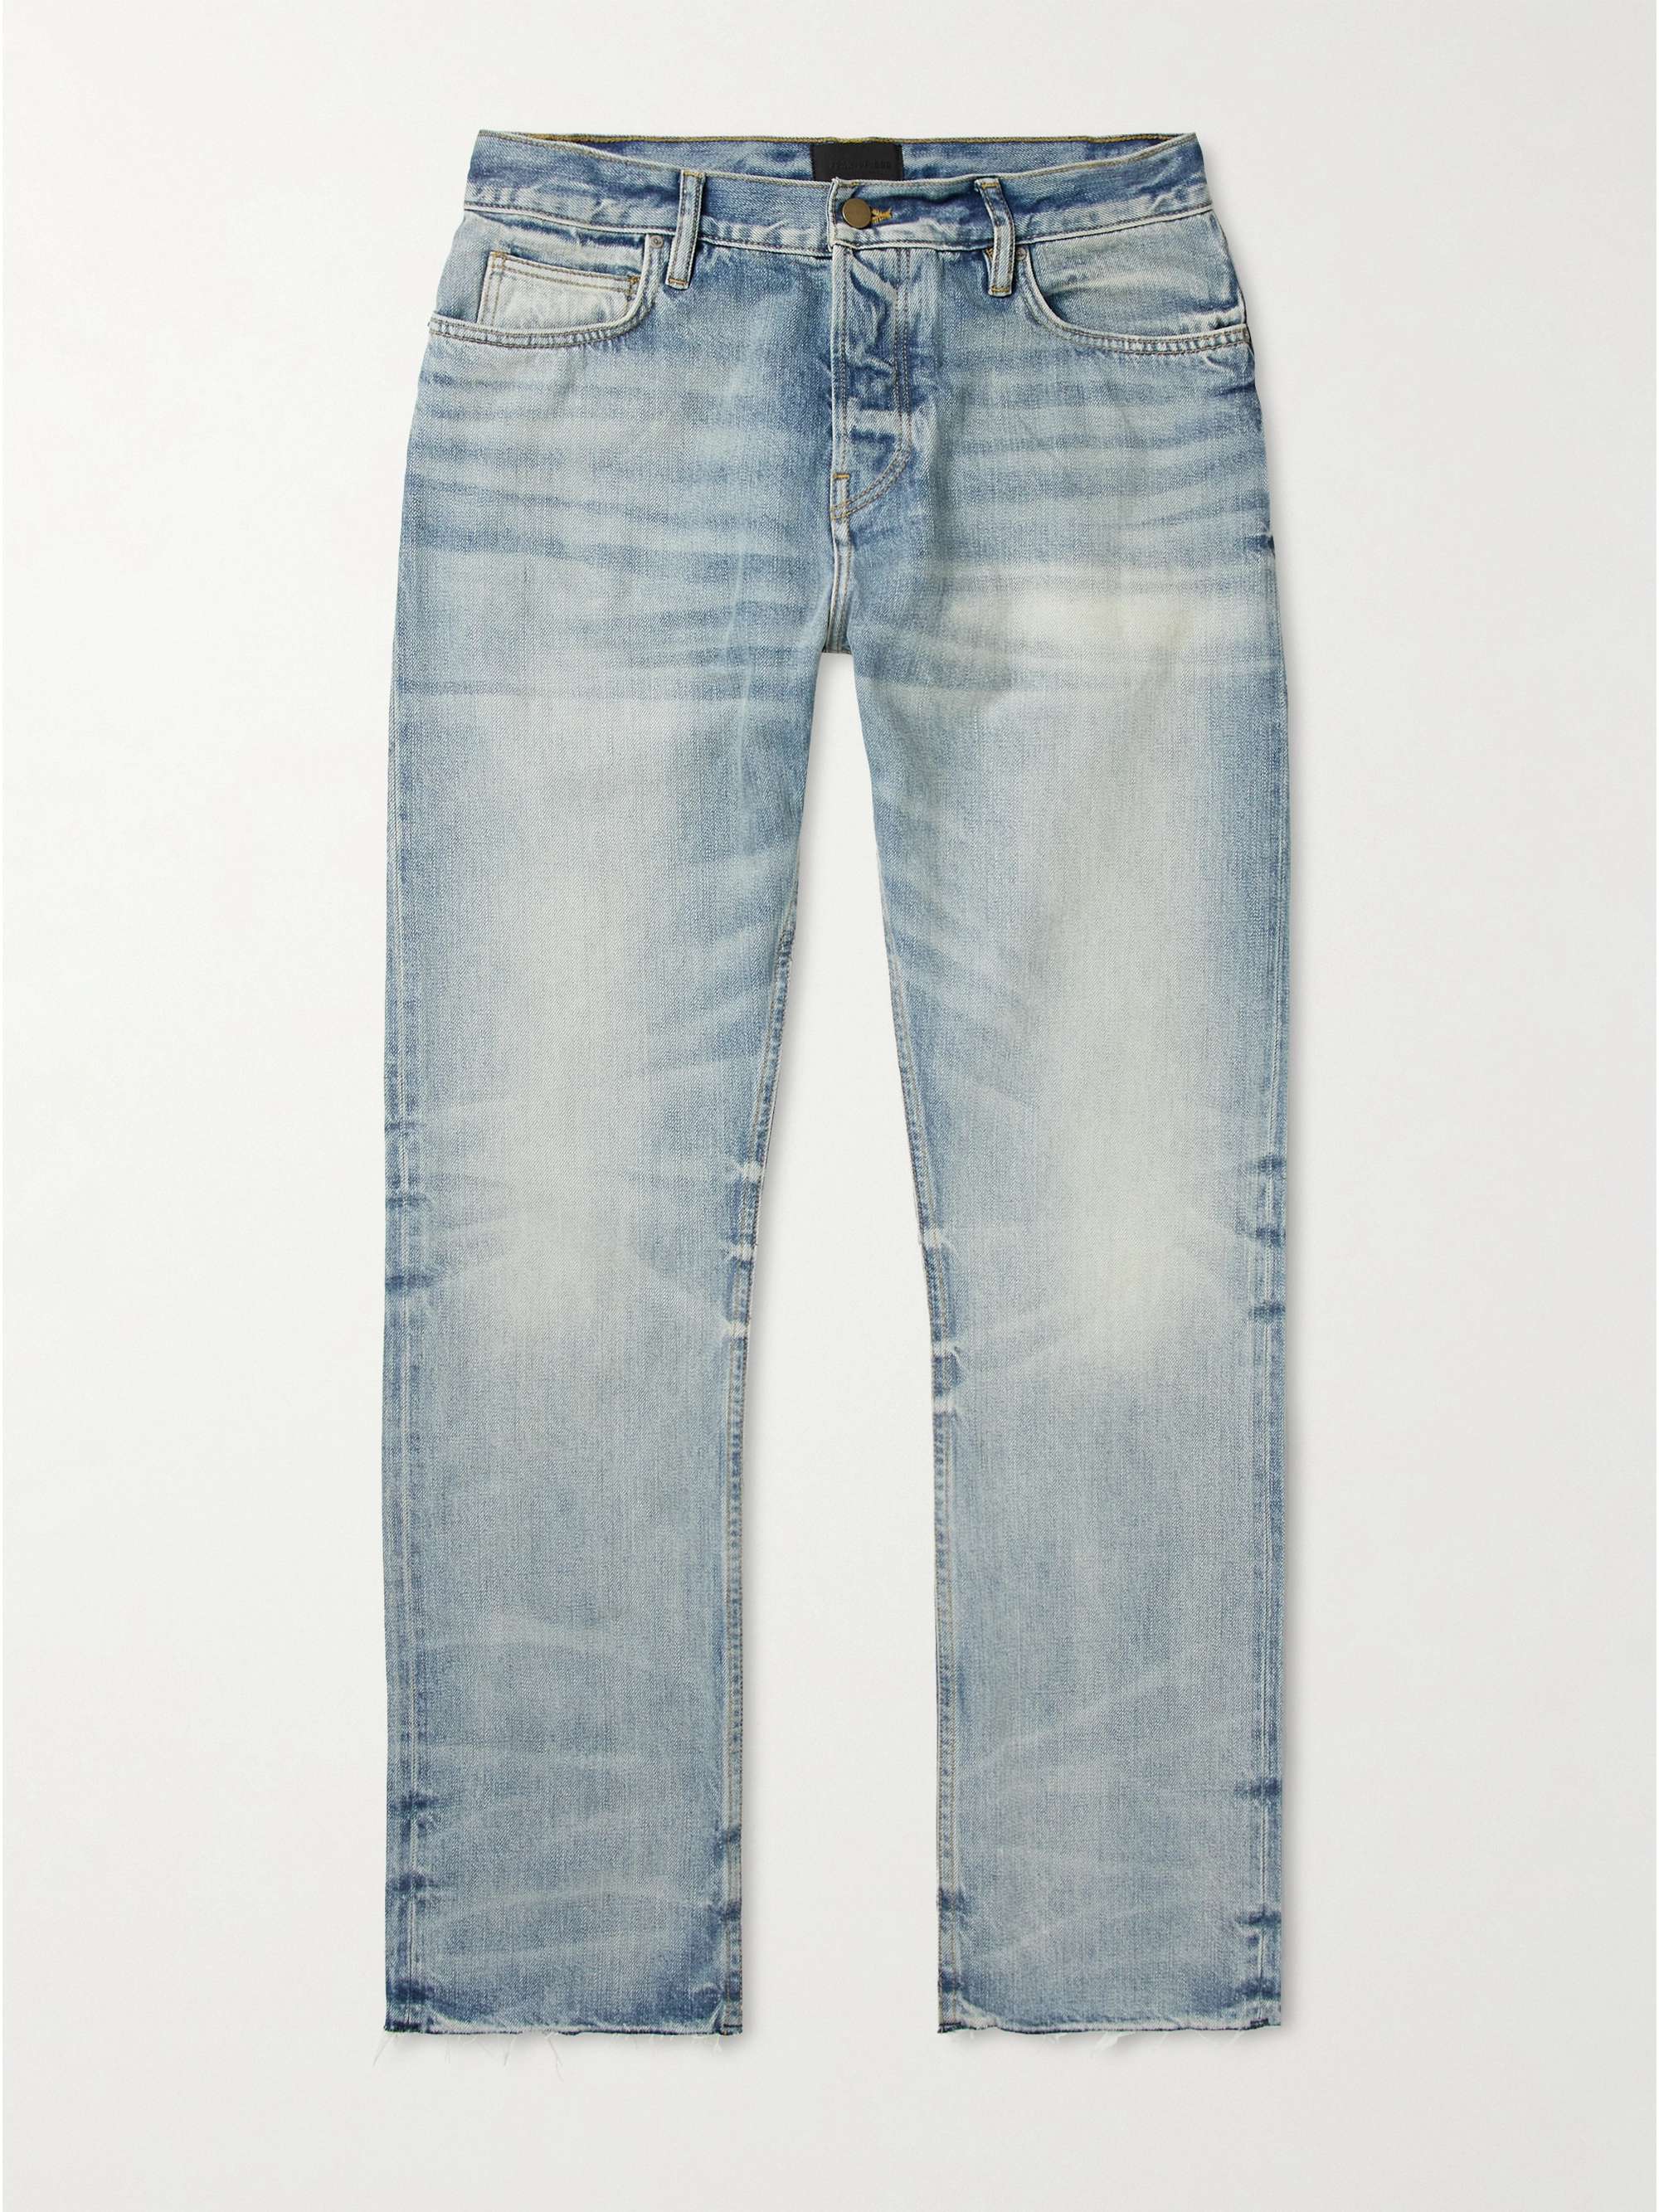 FEAR OF GOD Slim-Fit Distressed Jeans